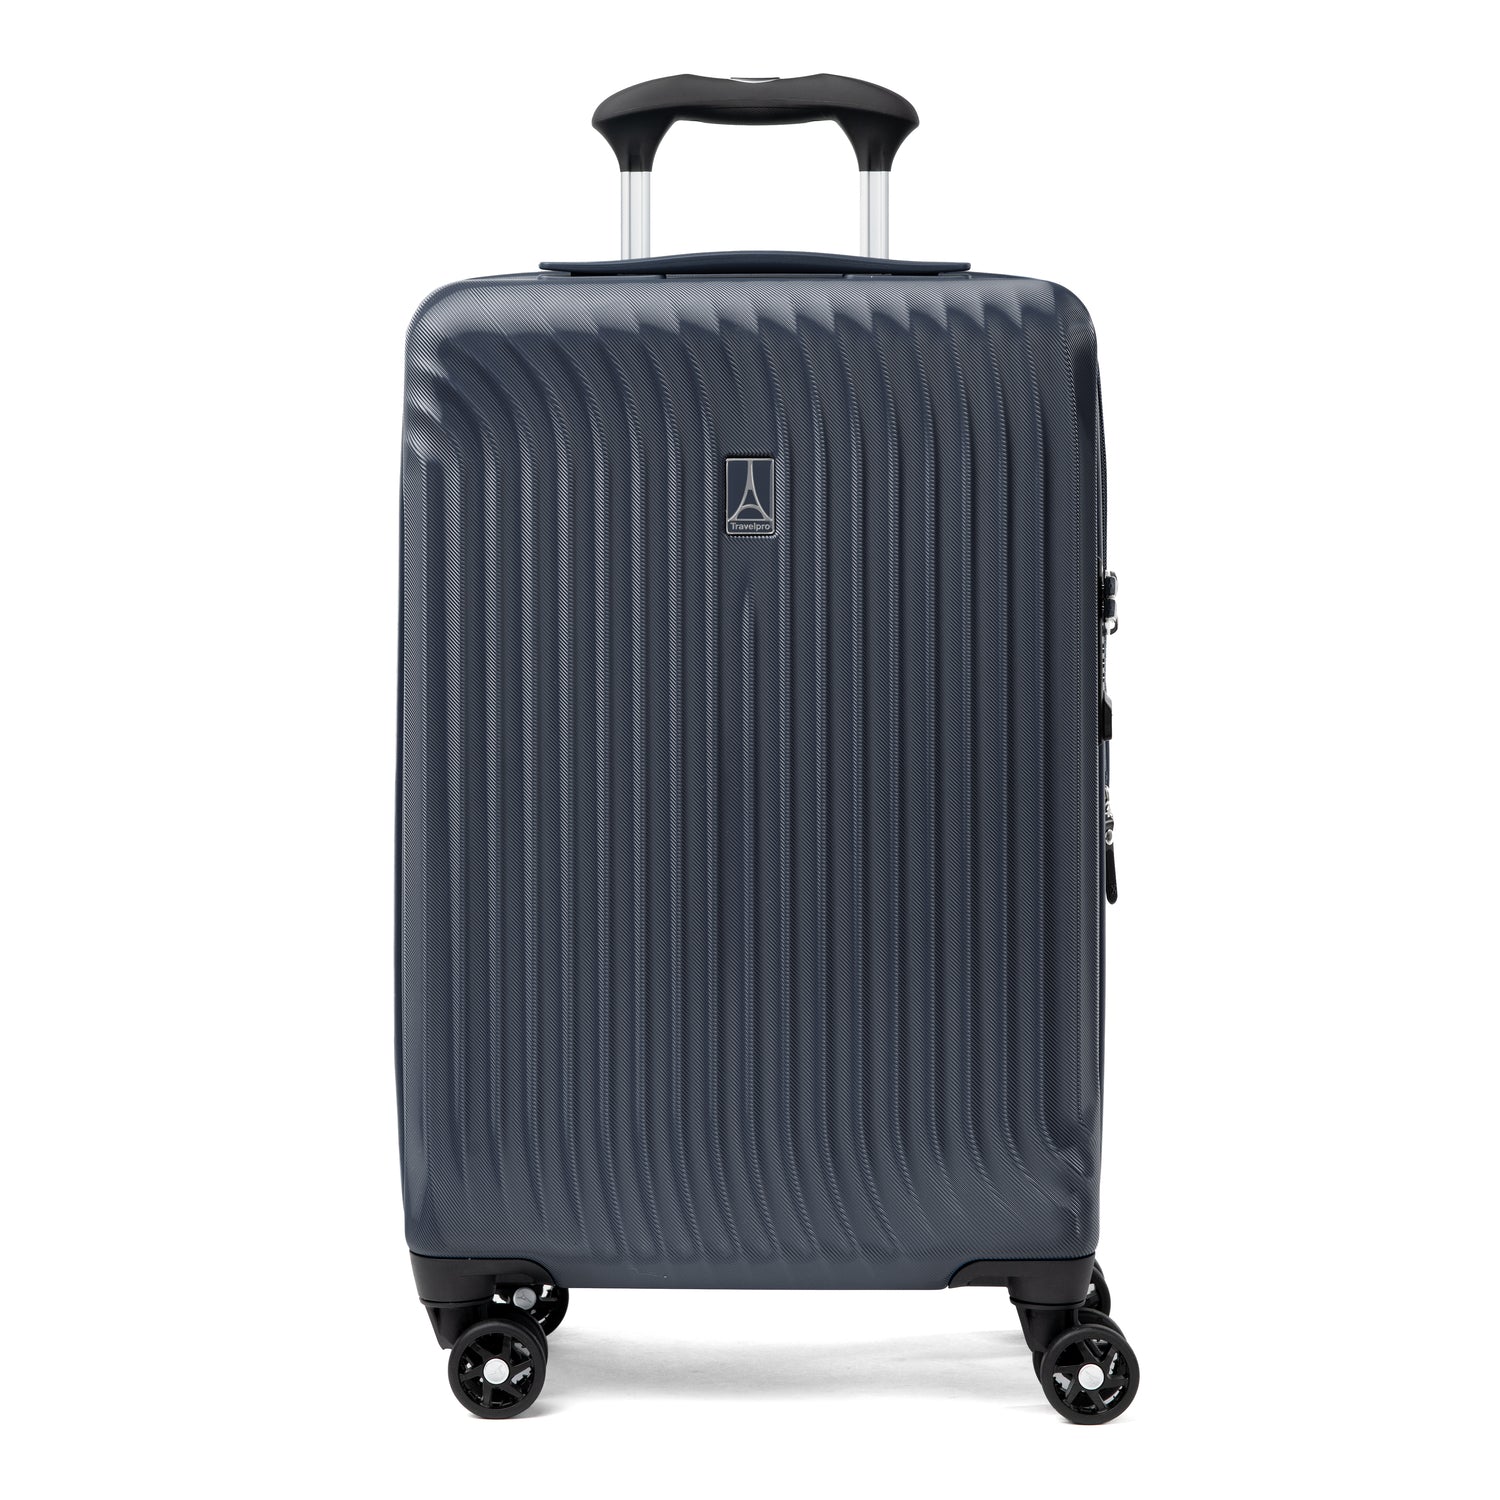 Travelpro: Travel Luggage, Suitcase Sets, Weekenders & More